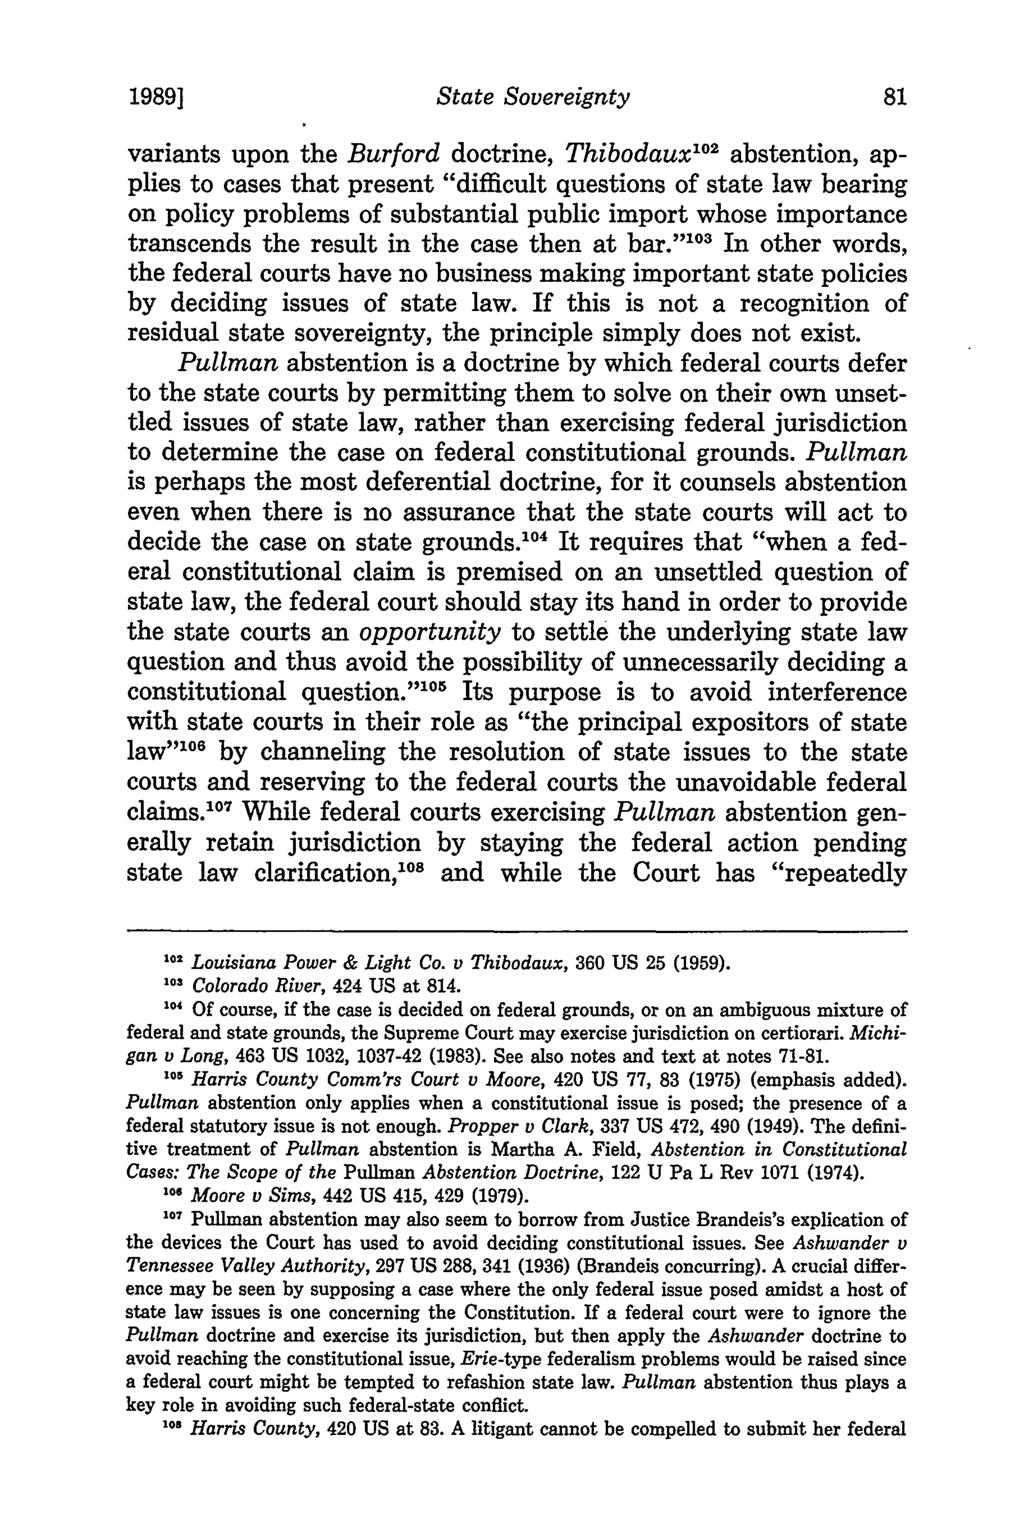 19891 State Sovereignty variants upon the Burford doctrine, Thibodaux' abstention, applies to cases that present "difficult questions of state law bearing on policy problems of substantial public